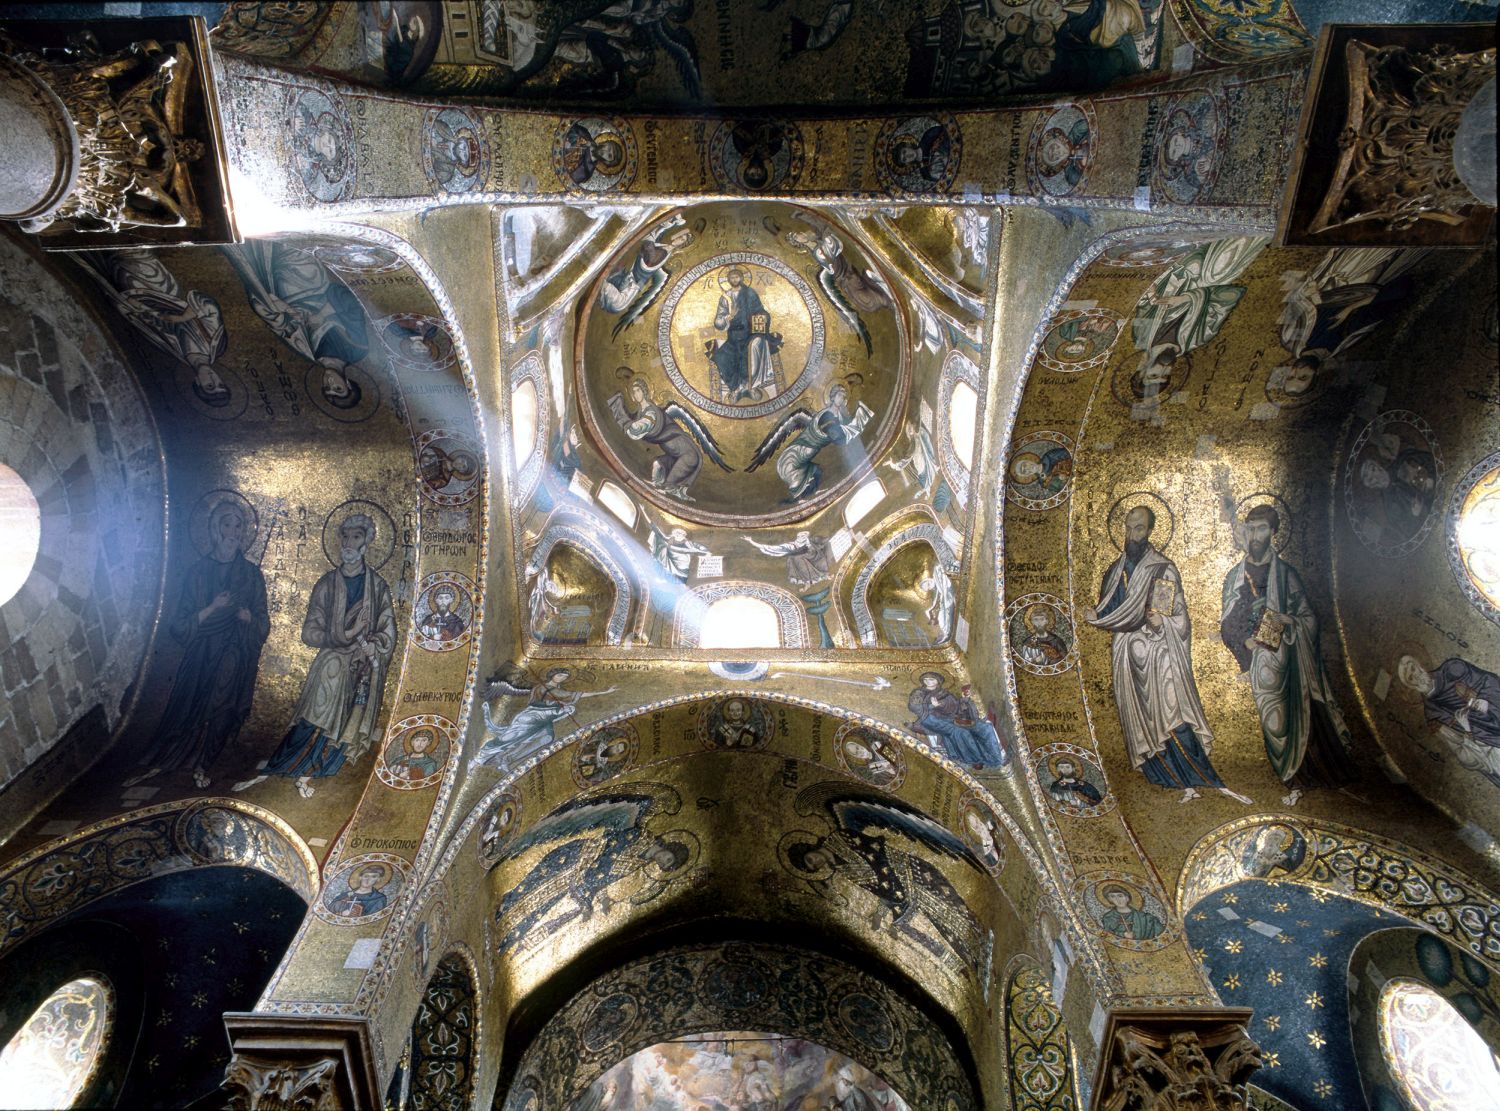 View of ceiling.